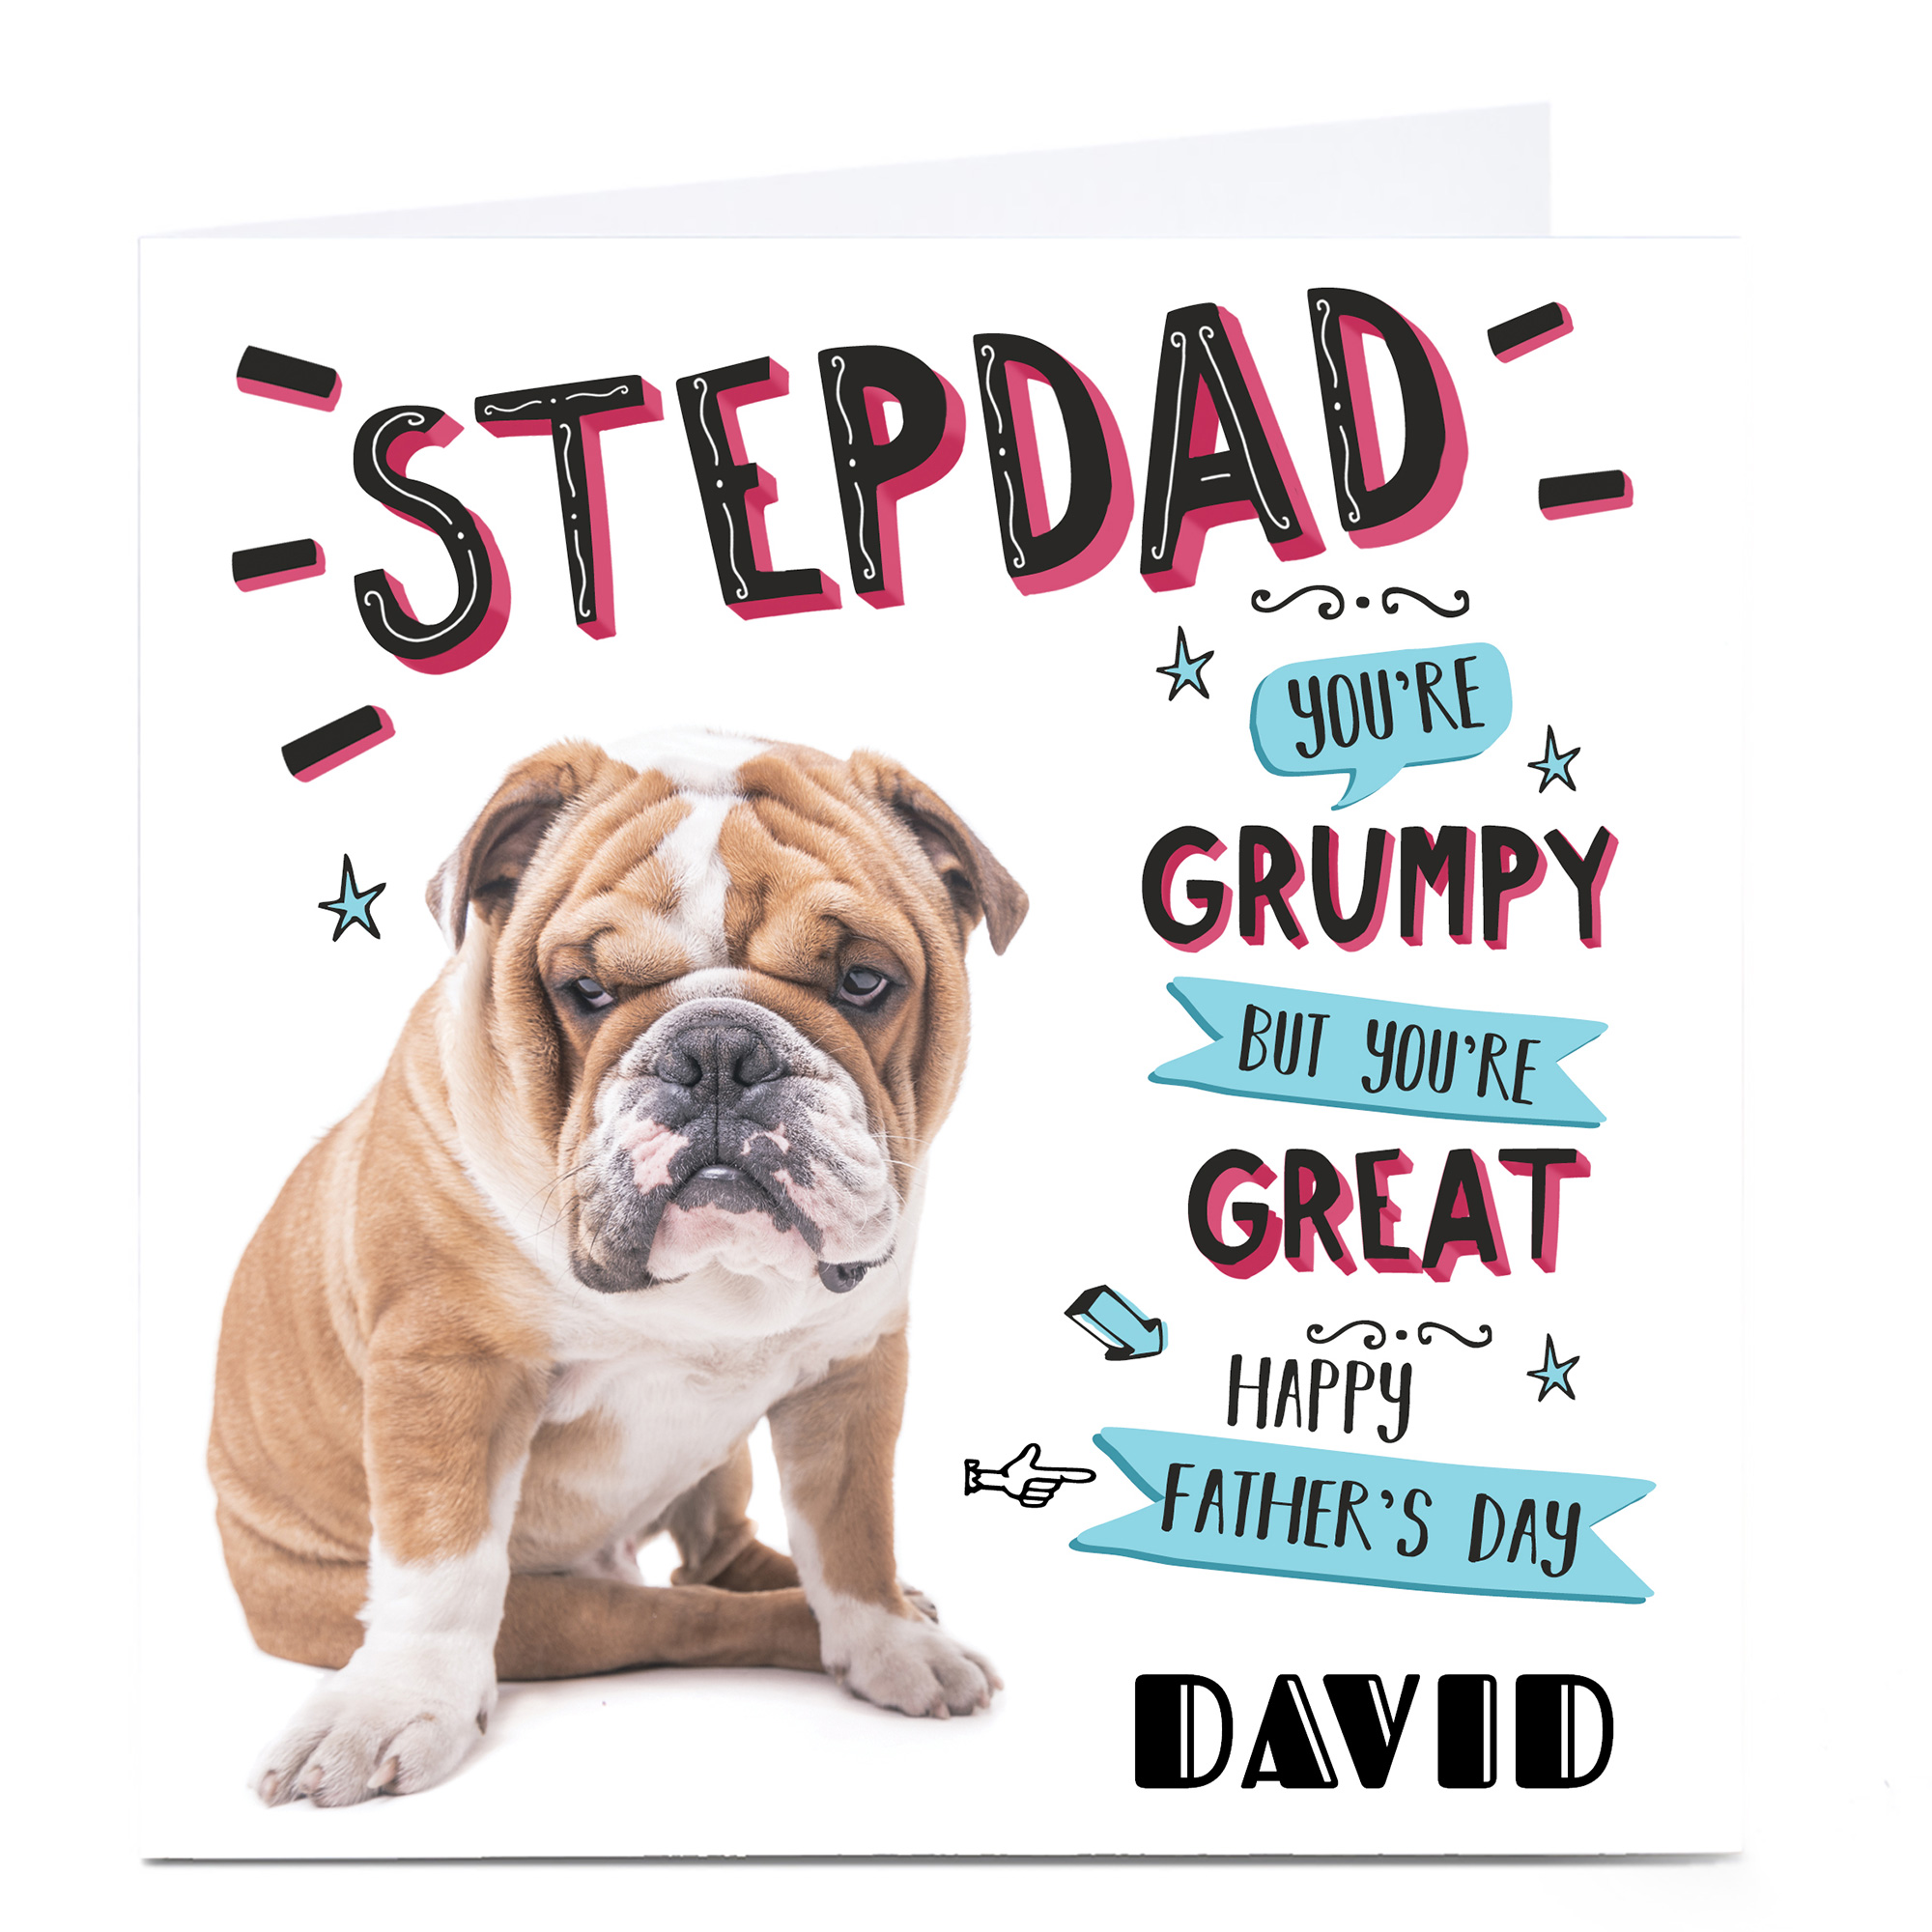 Personalised Father's Day Card - Stepdad, Grumpy But Great